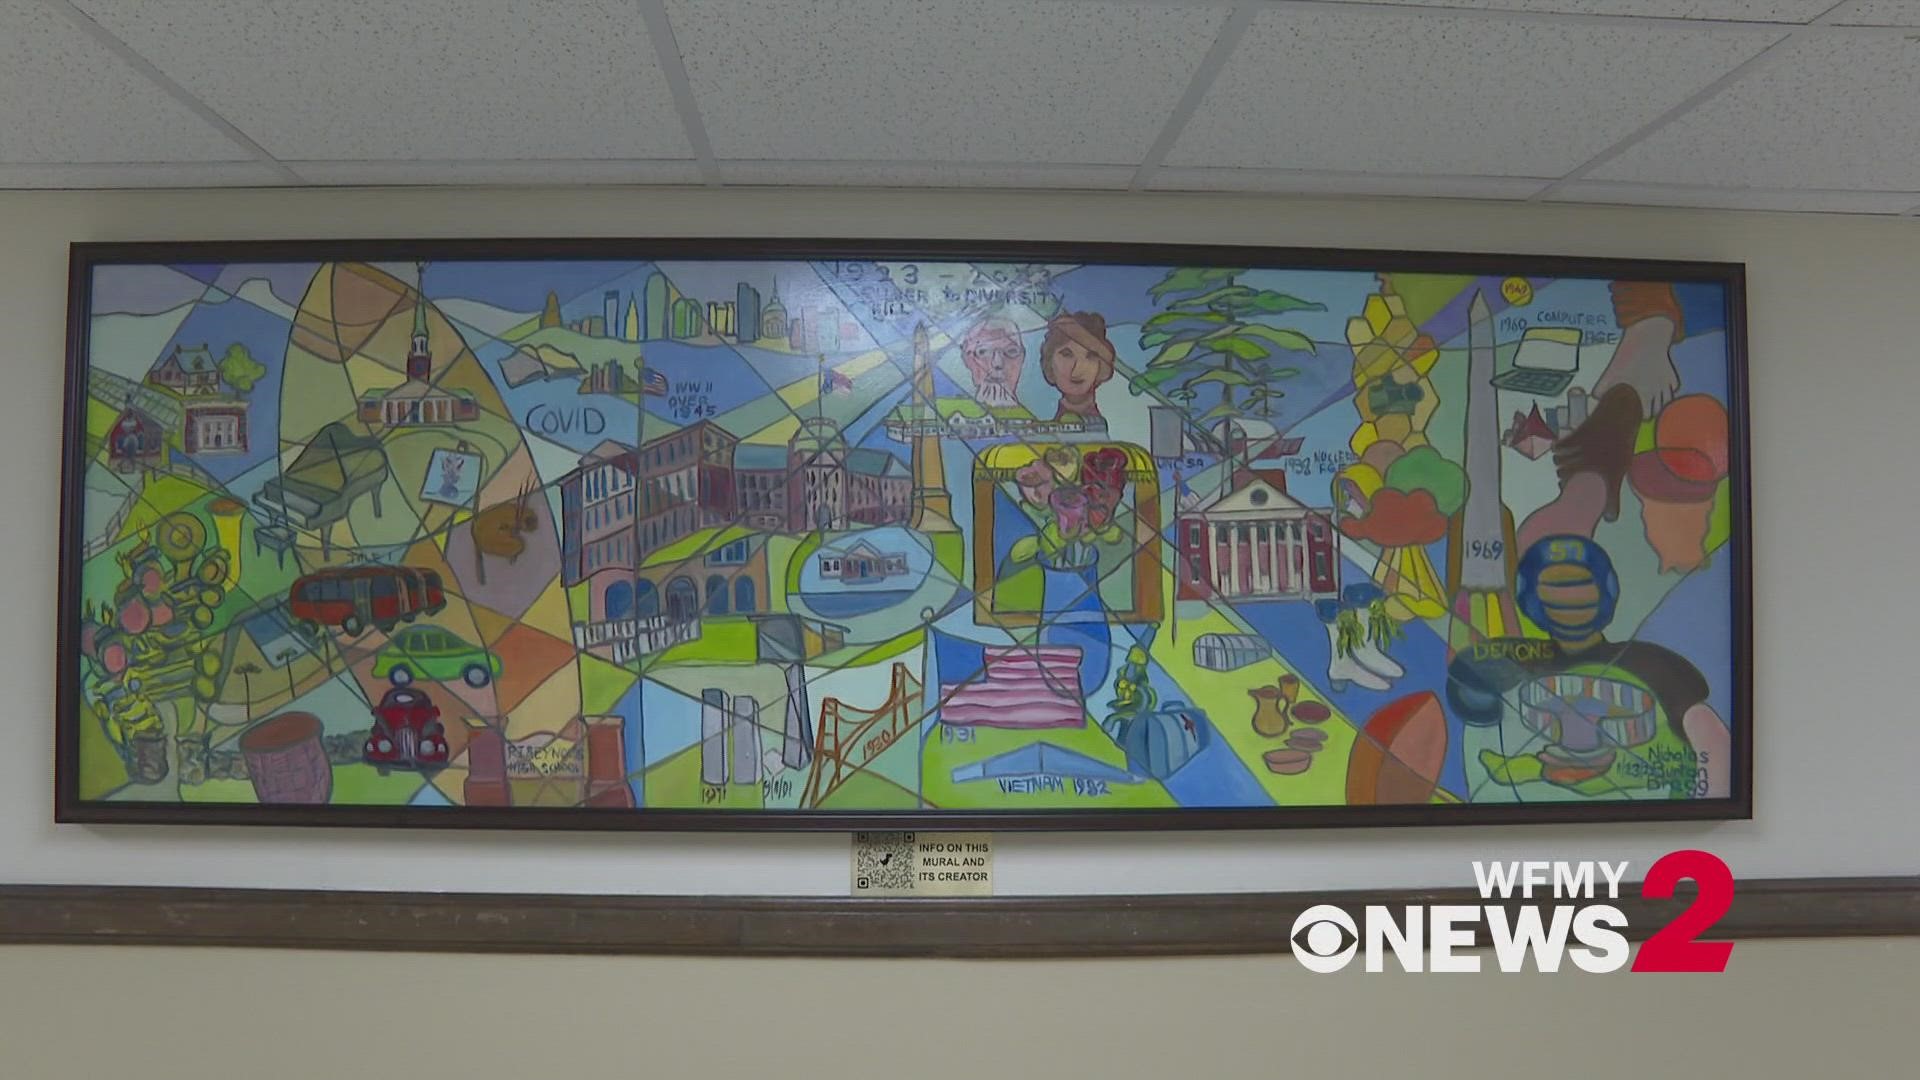 RJ Reynolds High in Winston-Salem celebrated 100 years. Wednesday, the school unveiled a mural showing all the school endured.